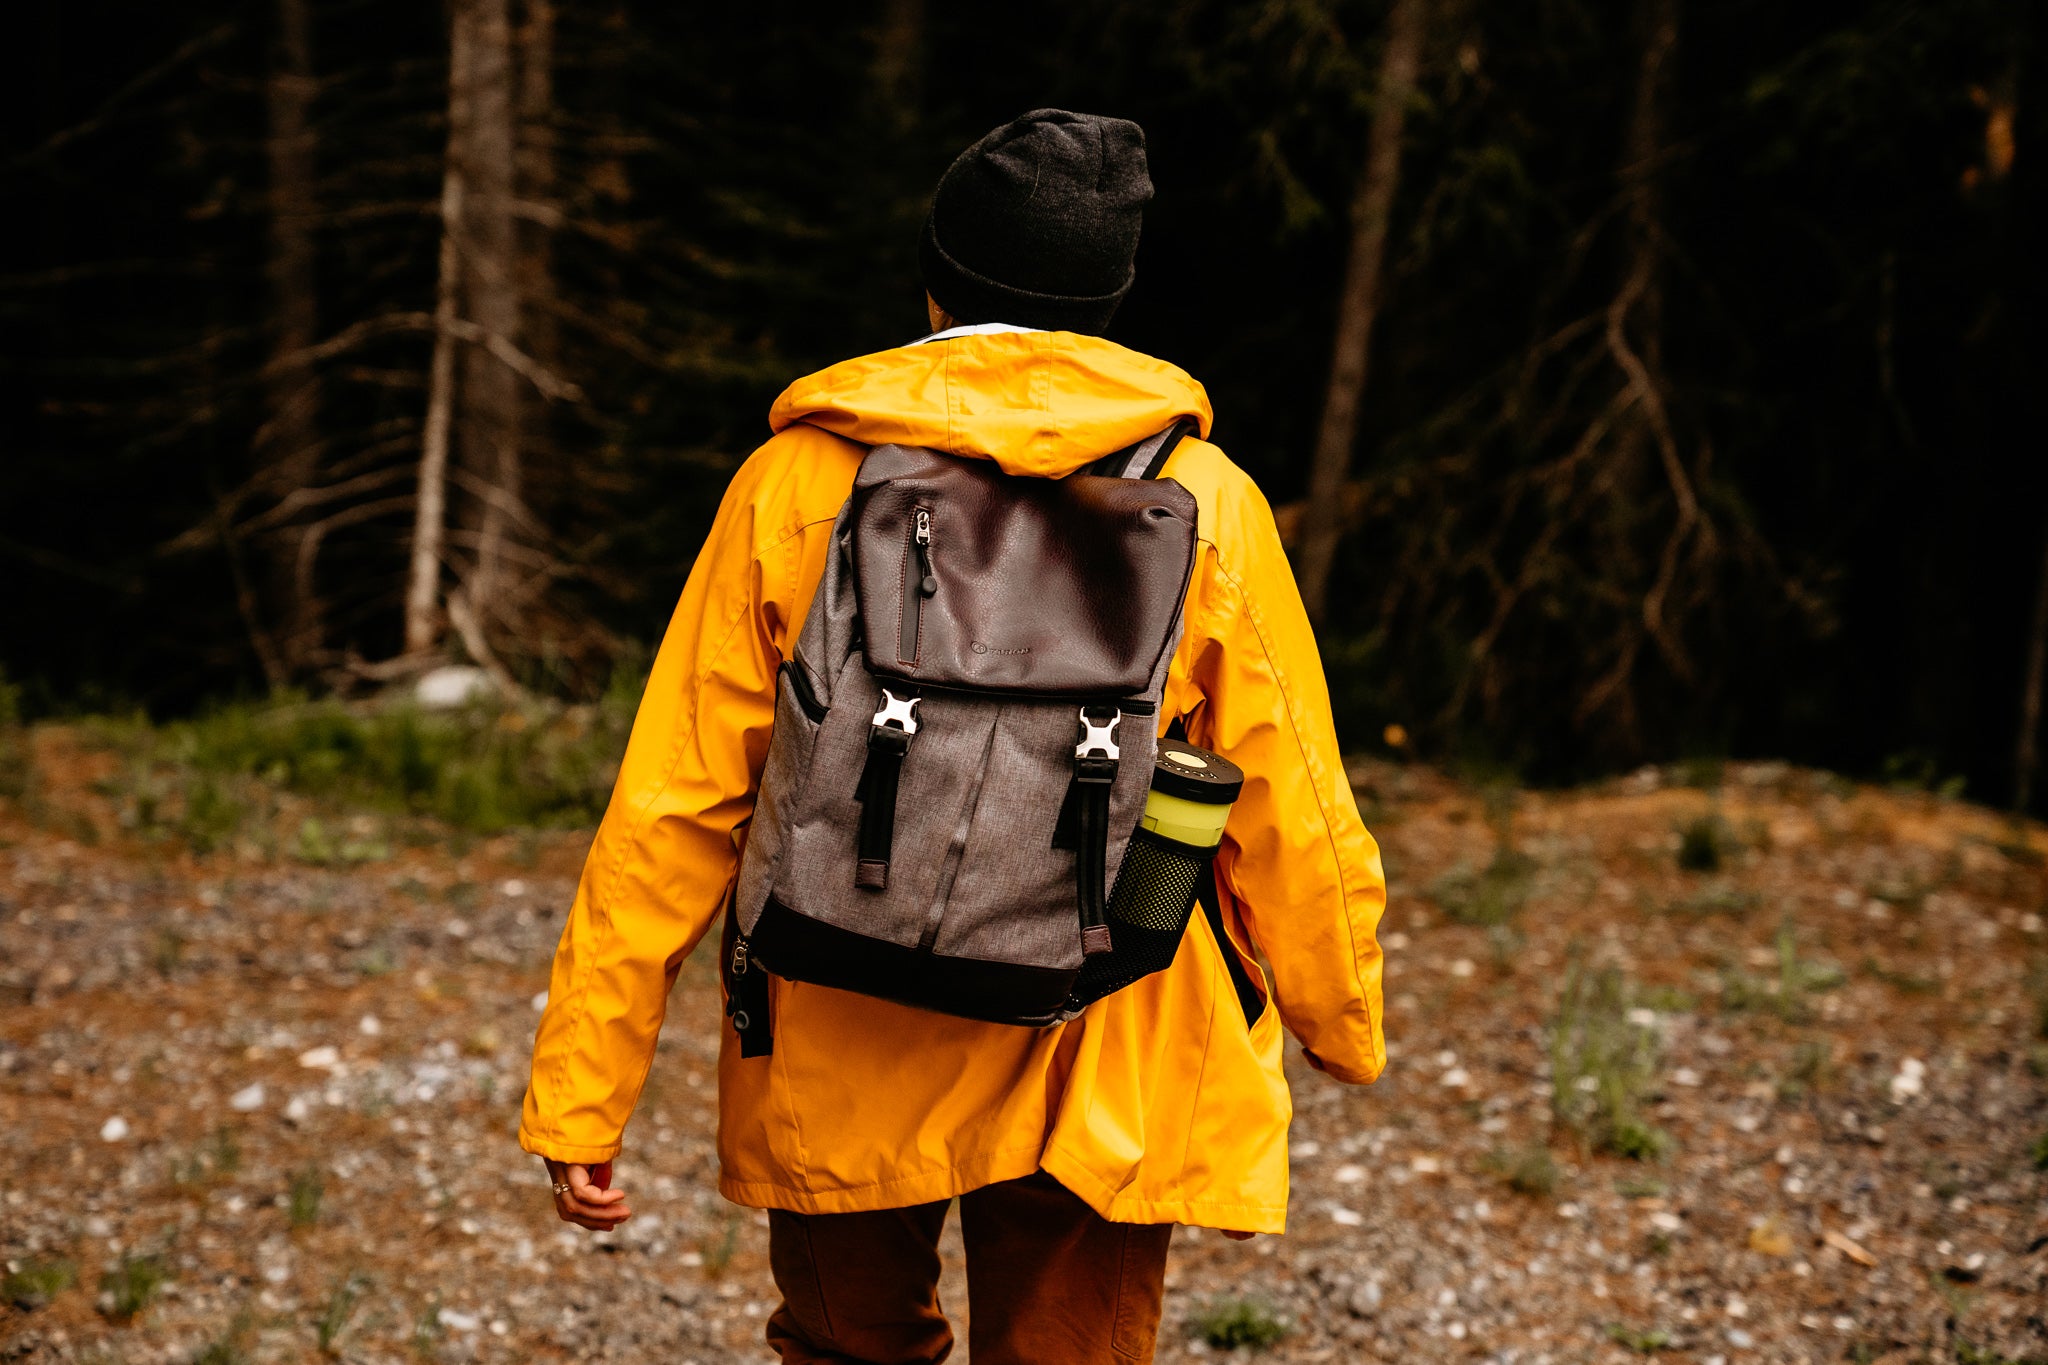 Woman in bright yellow raincoat with backpack with electric camping stove in pocket